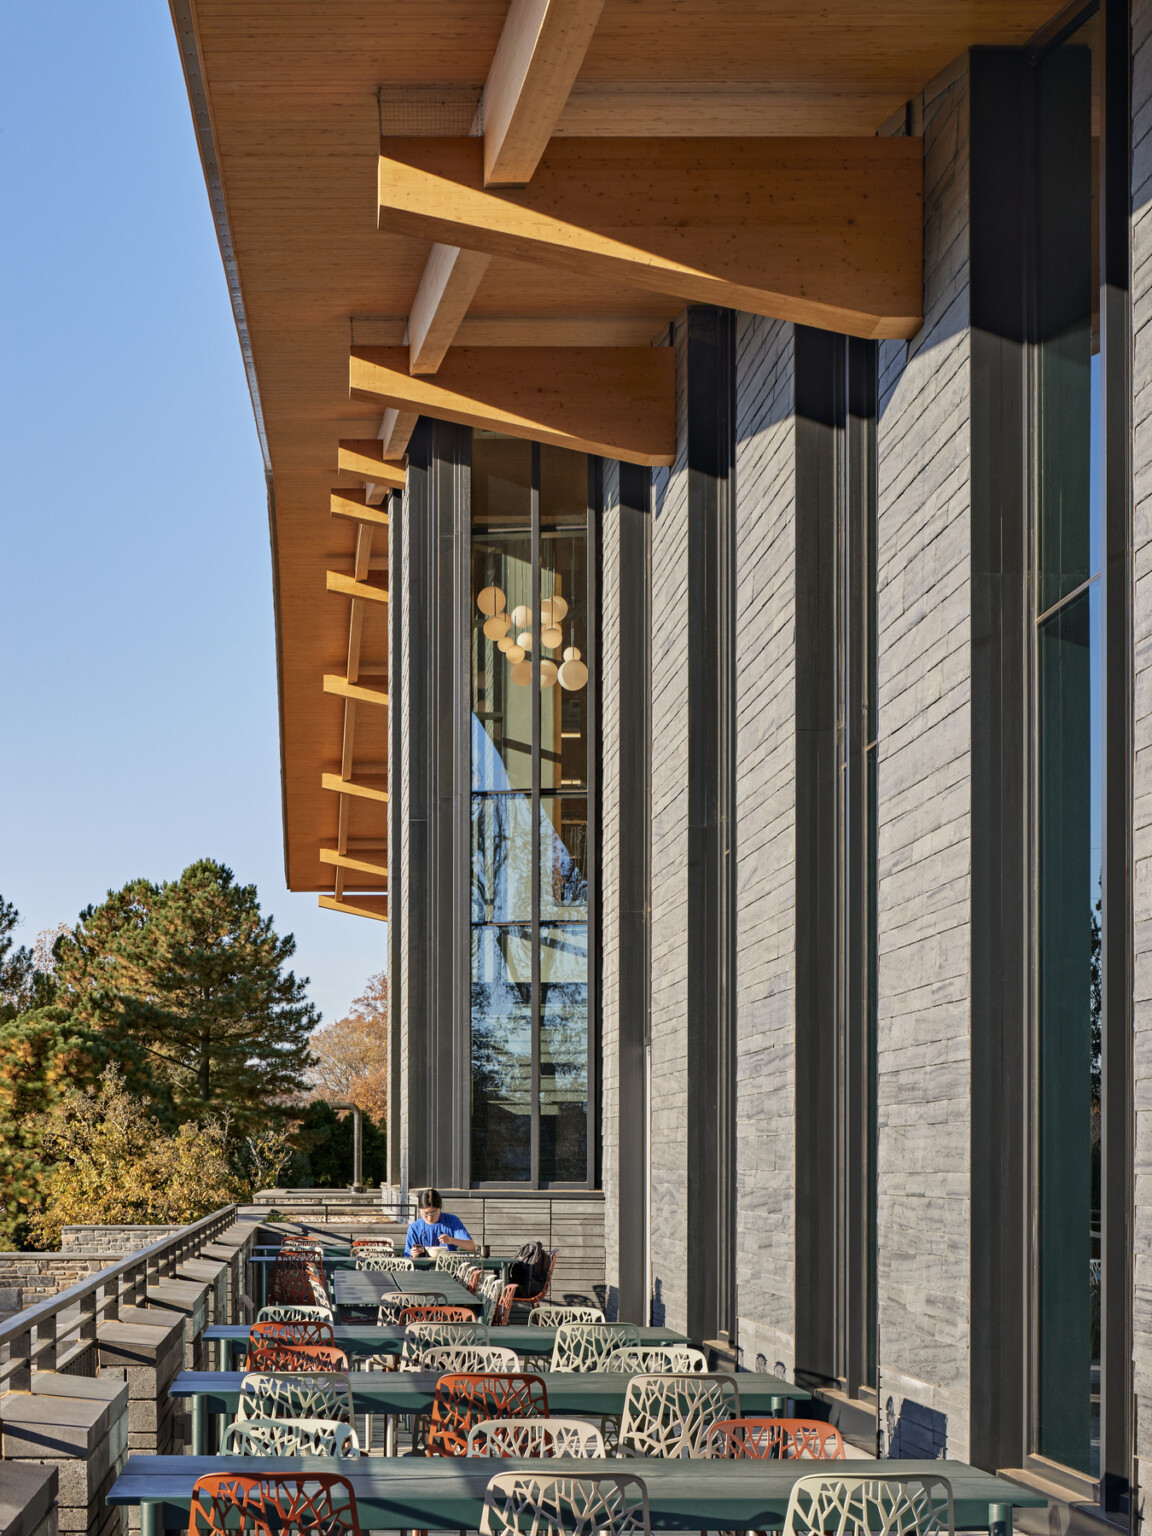 Exterior flexible seating area partially shaded by mass timber canopy overhang on stone building with large windows